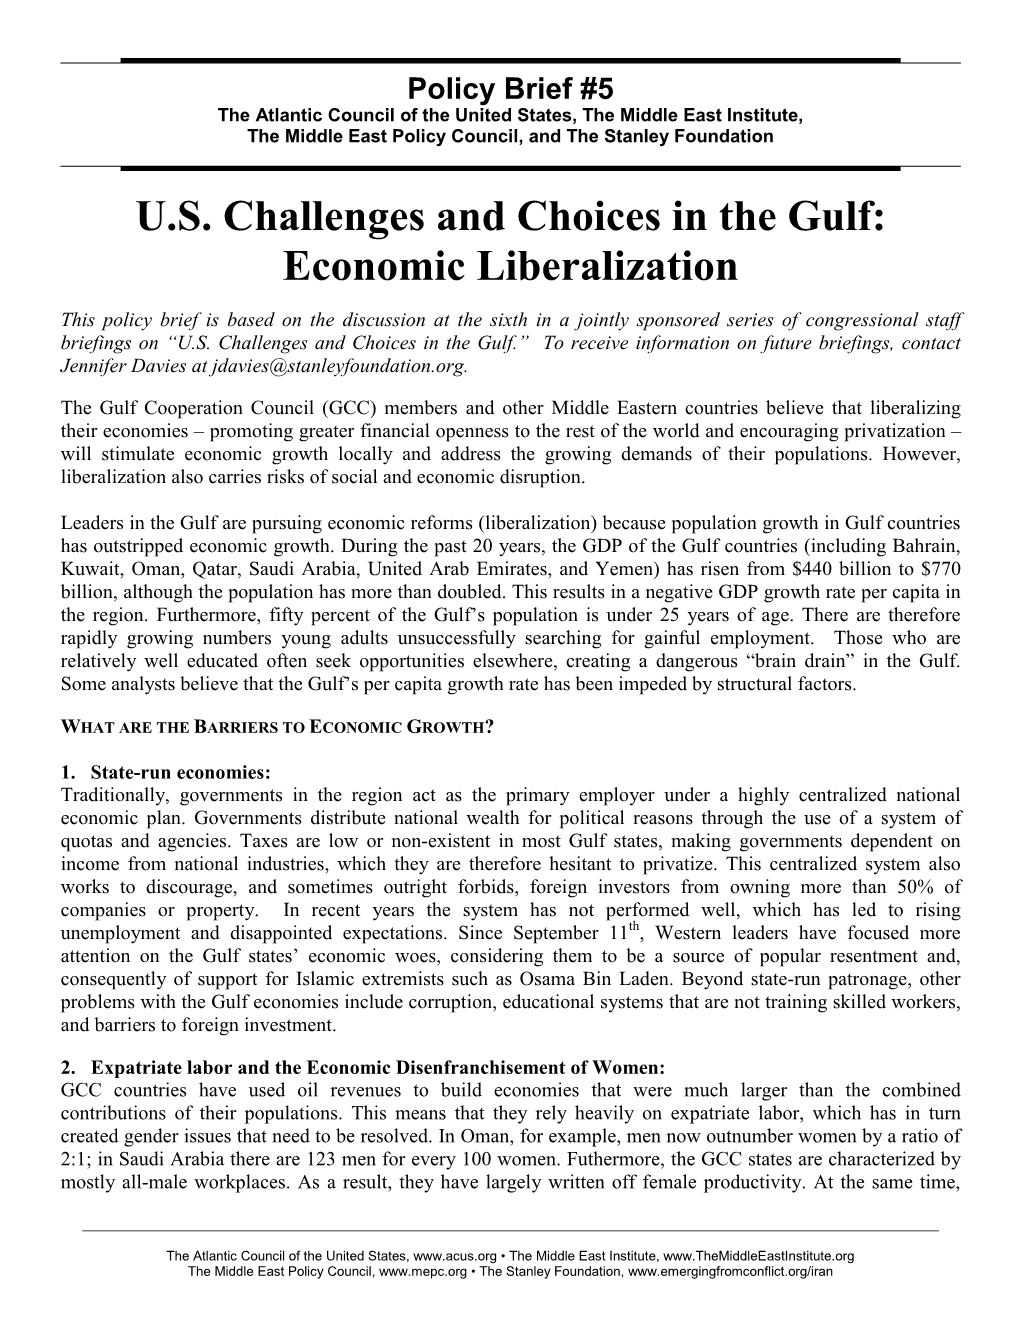 US Challenges and Choices in the Gulf: Economic Liberalization